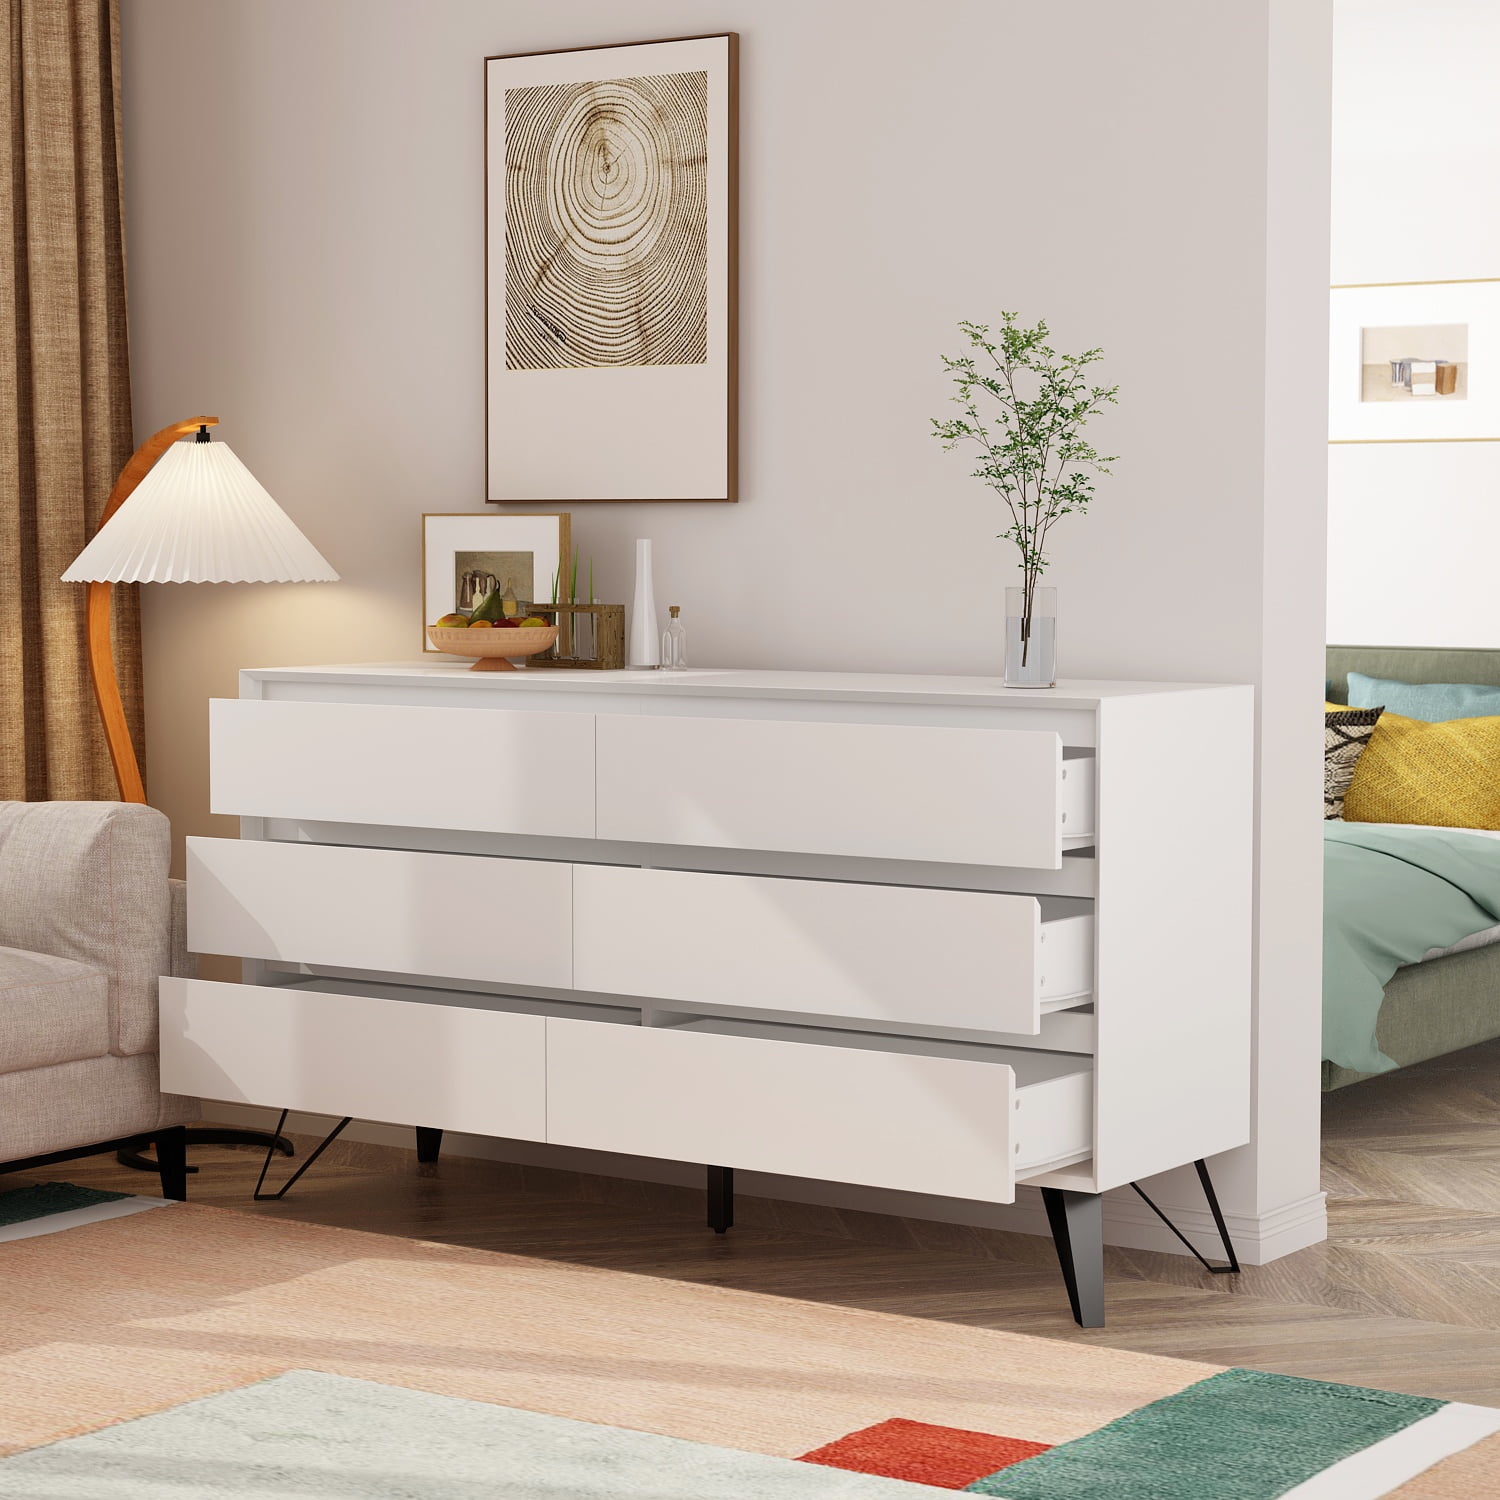 Timechee 6 Drawer Dresser for Bedroom, Chest of Drawers with Meatal ...